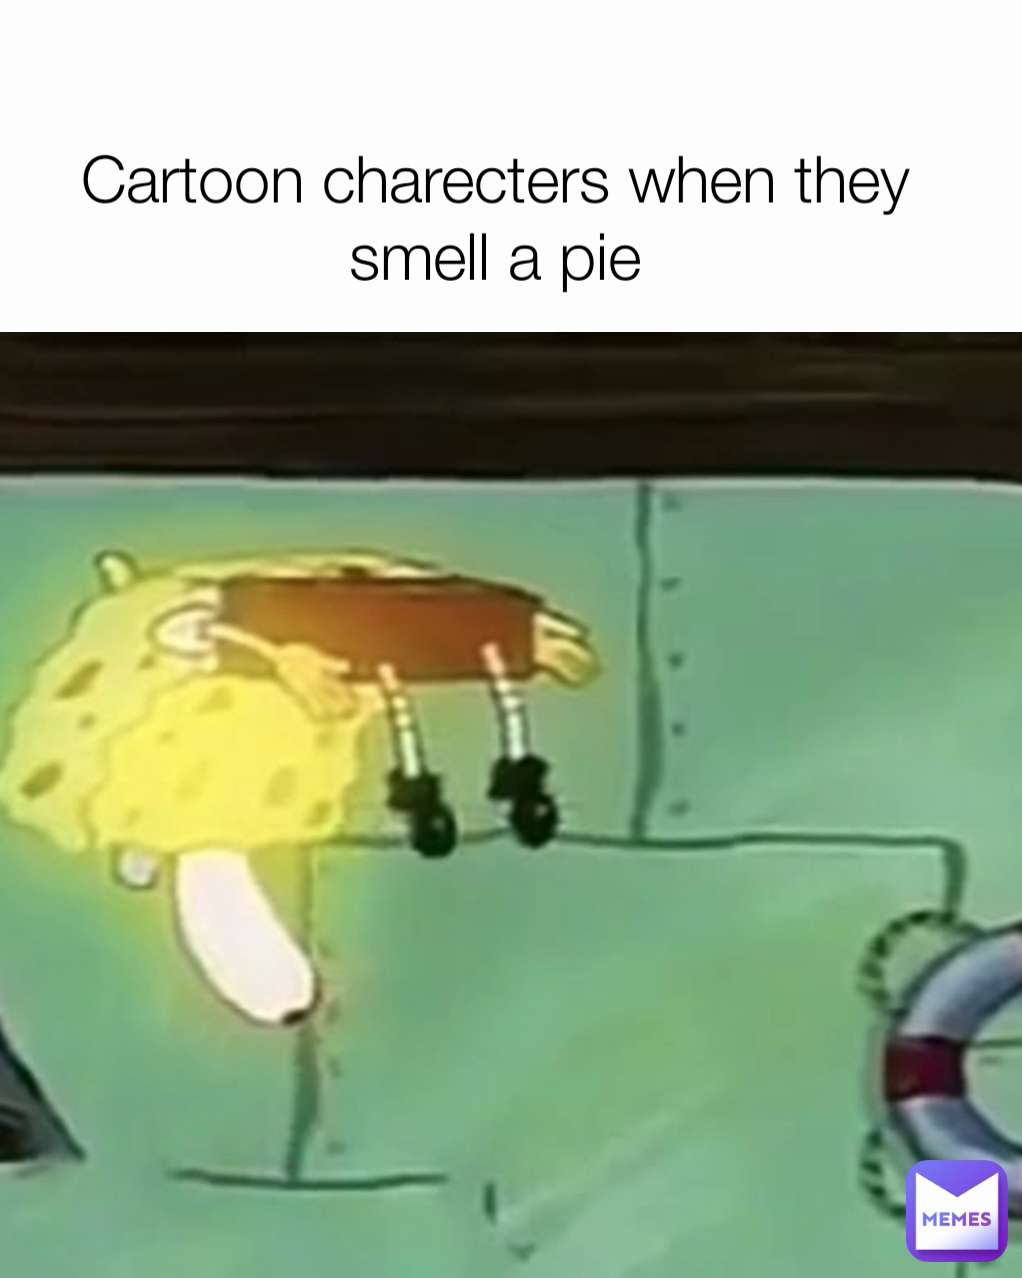 Cartoon charecters when they smell a pie